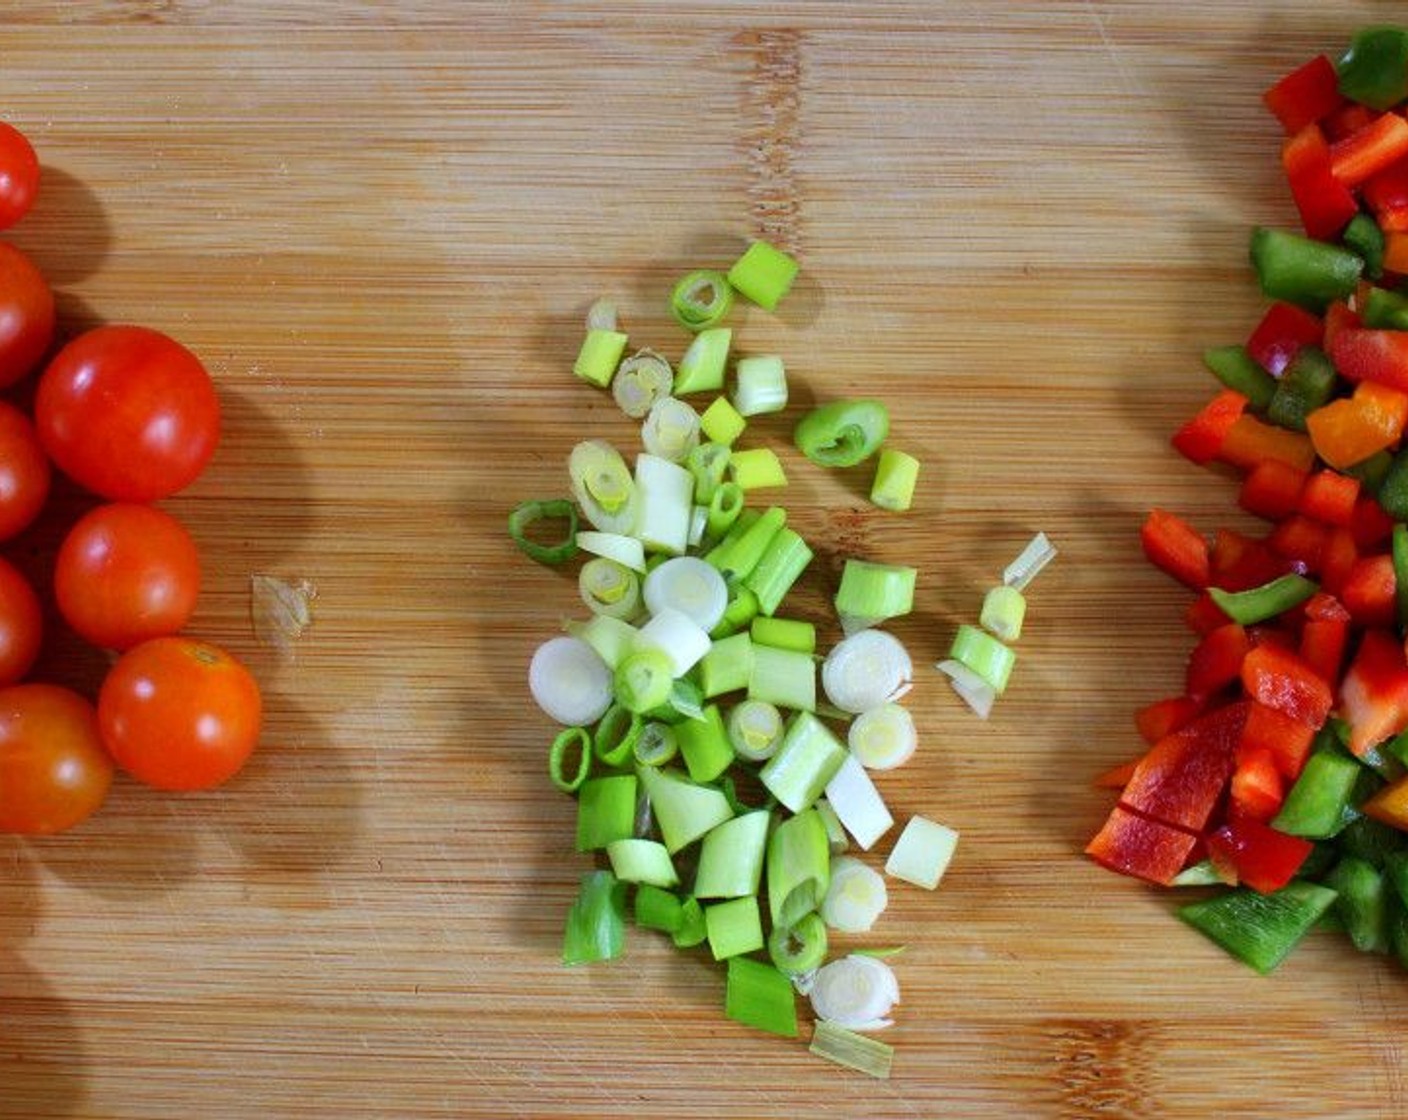 step 8 For the “garnish”, cut Scallions (4 stalks), wash Grape Tomatoes (2 cups) and add the remaining diced peppers.